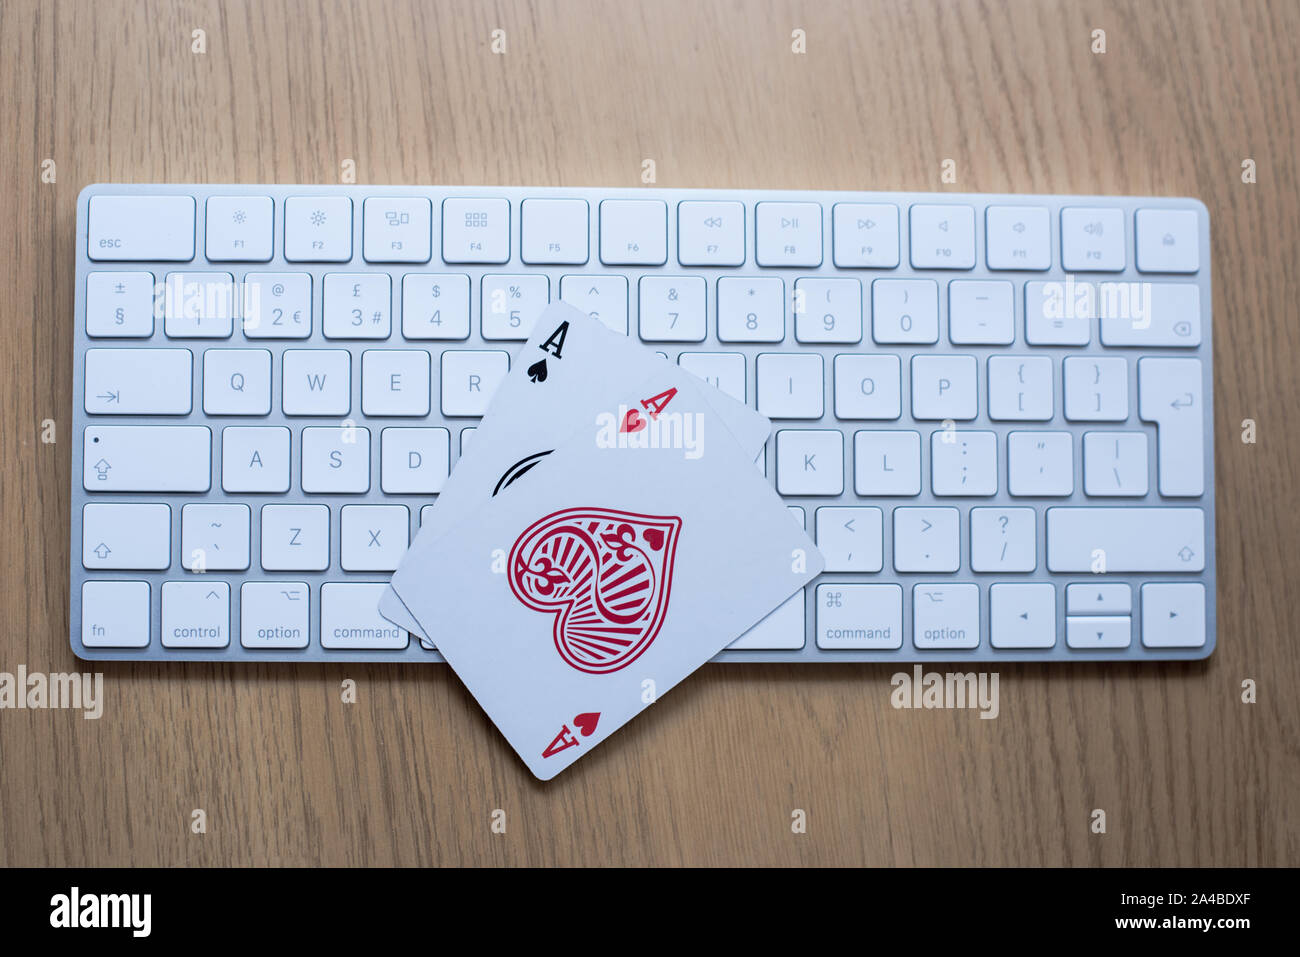 Online gambling and poker play concept with keyboard on a table showing double ace cards Stock Photo